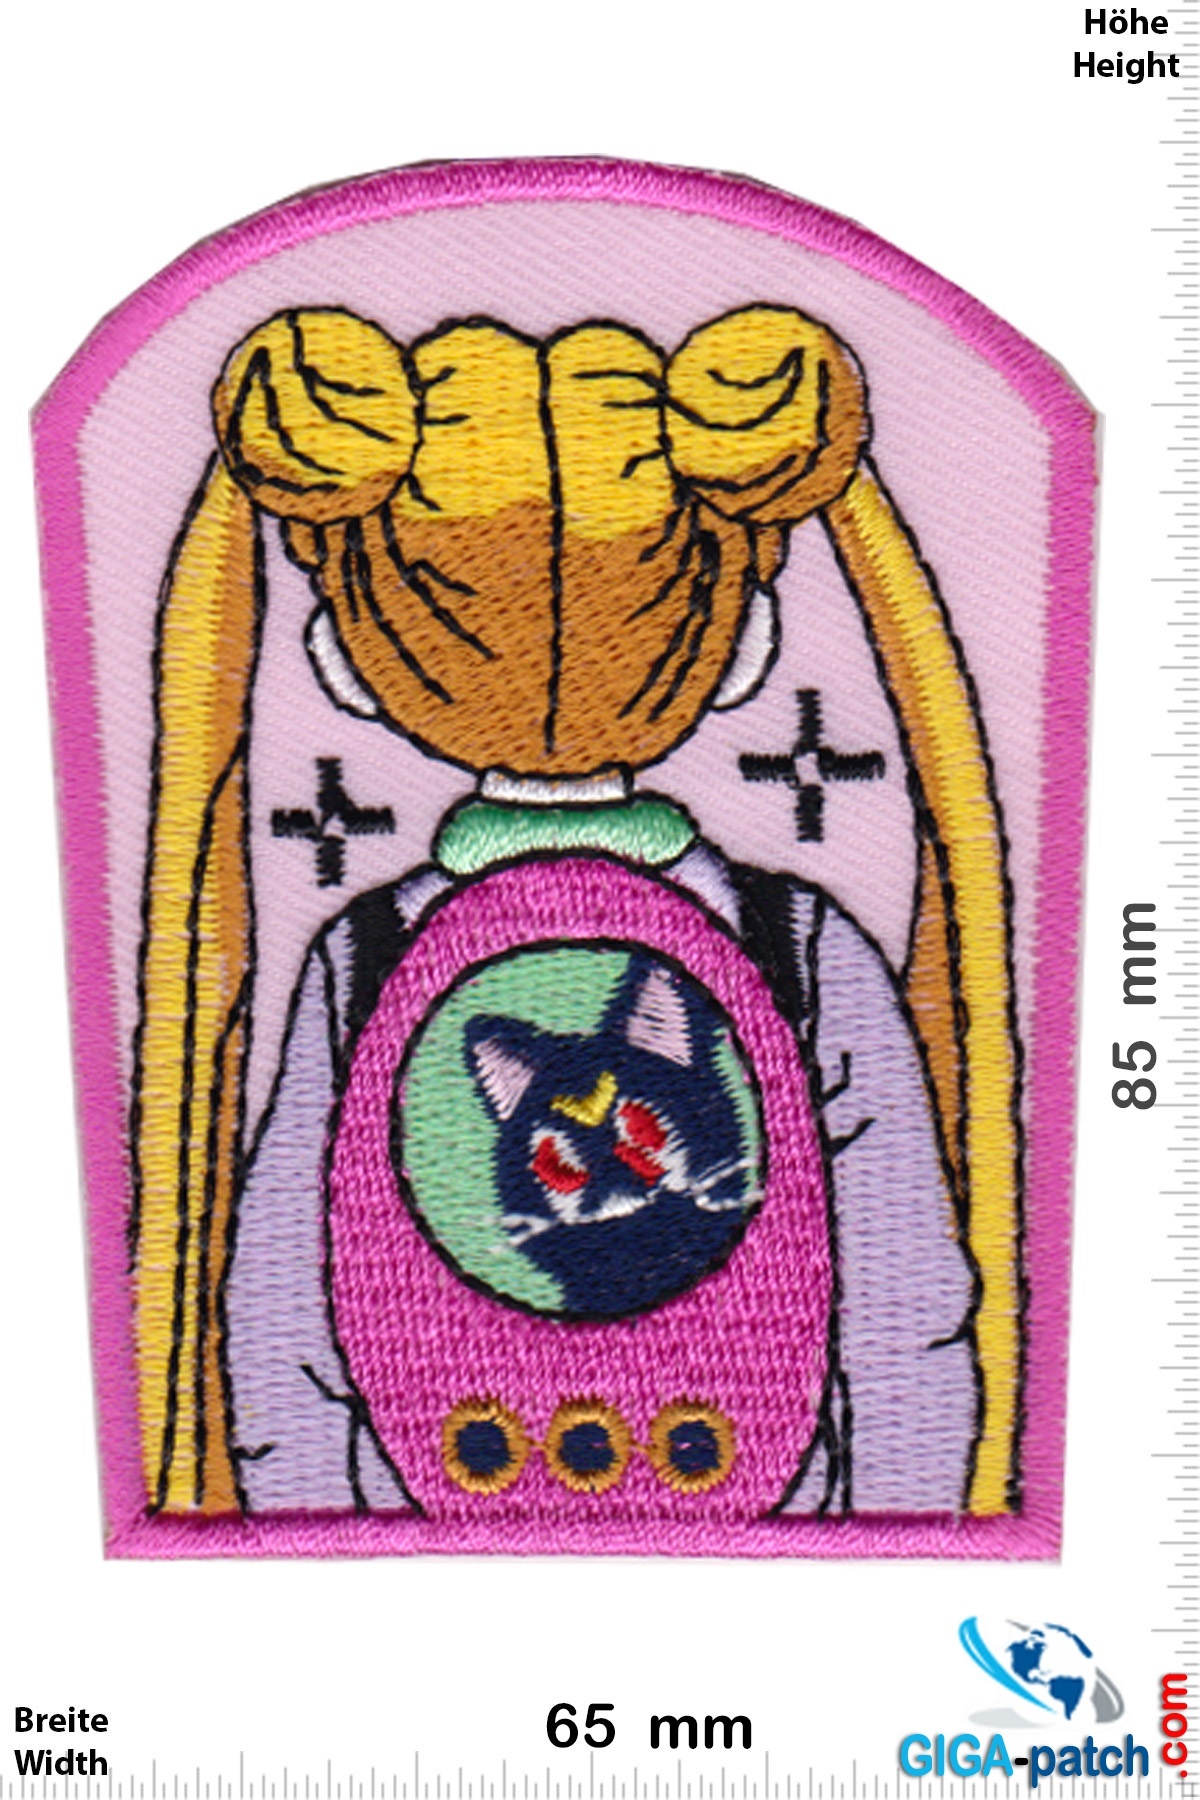 Download Sailor Moon Sailor Moon Cat Bag Manga Patch Back Patches Patch Keychains Stickers Giga Patch Com Biggest Patch Shop Worldwide